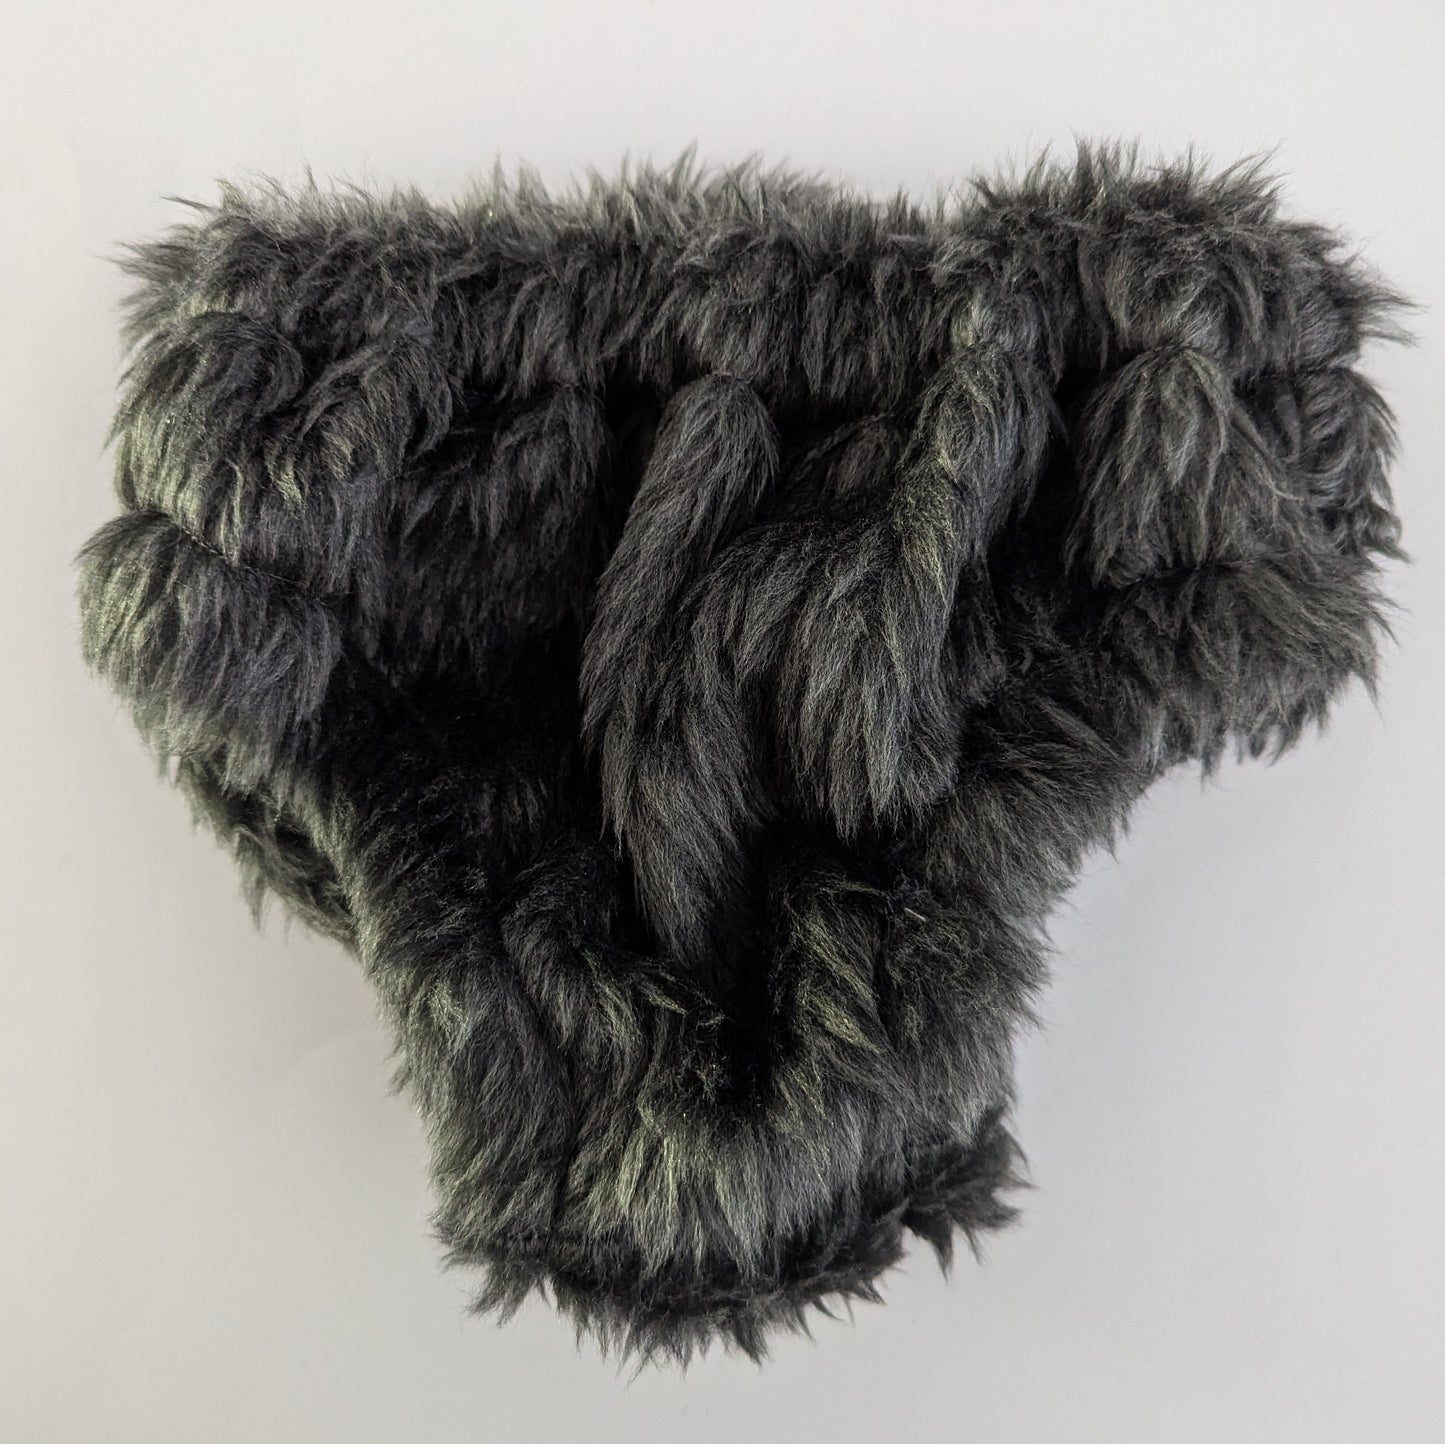 FAUX FUR - DARK GREY - Fake Animal Hair Baby Nappy Cover, Size 0 (6-12 months)